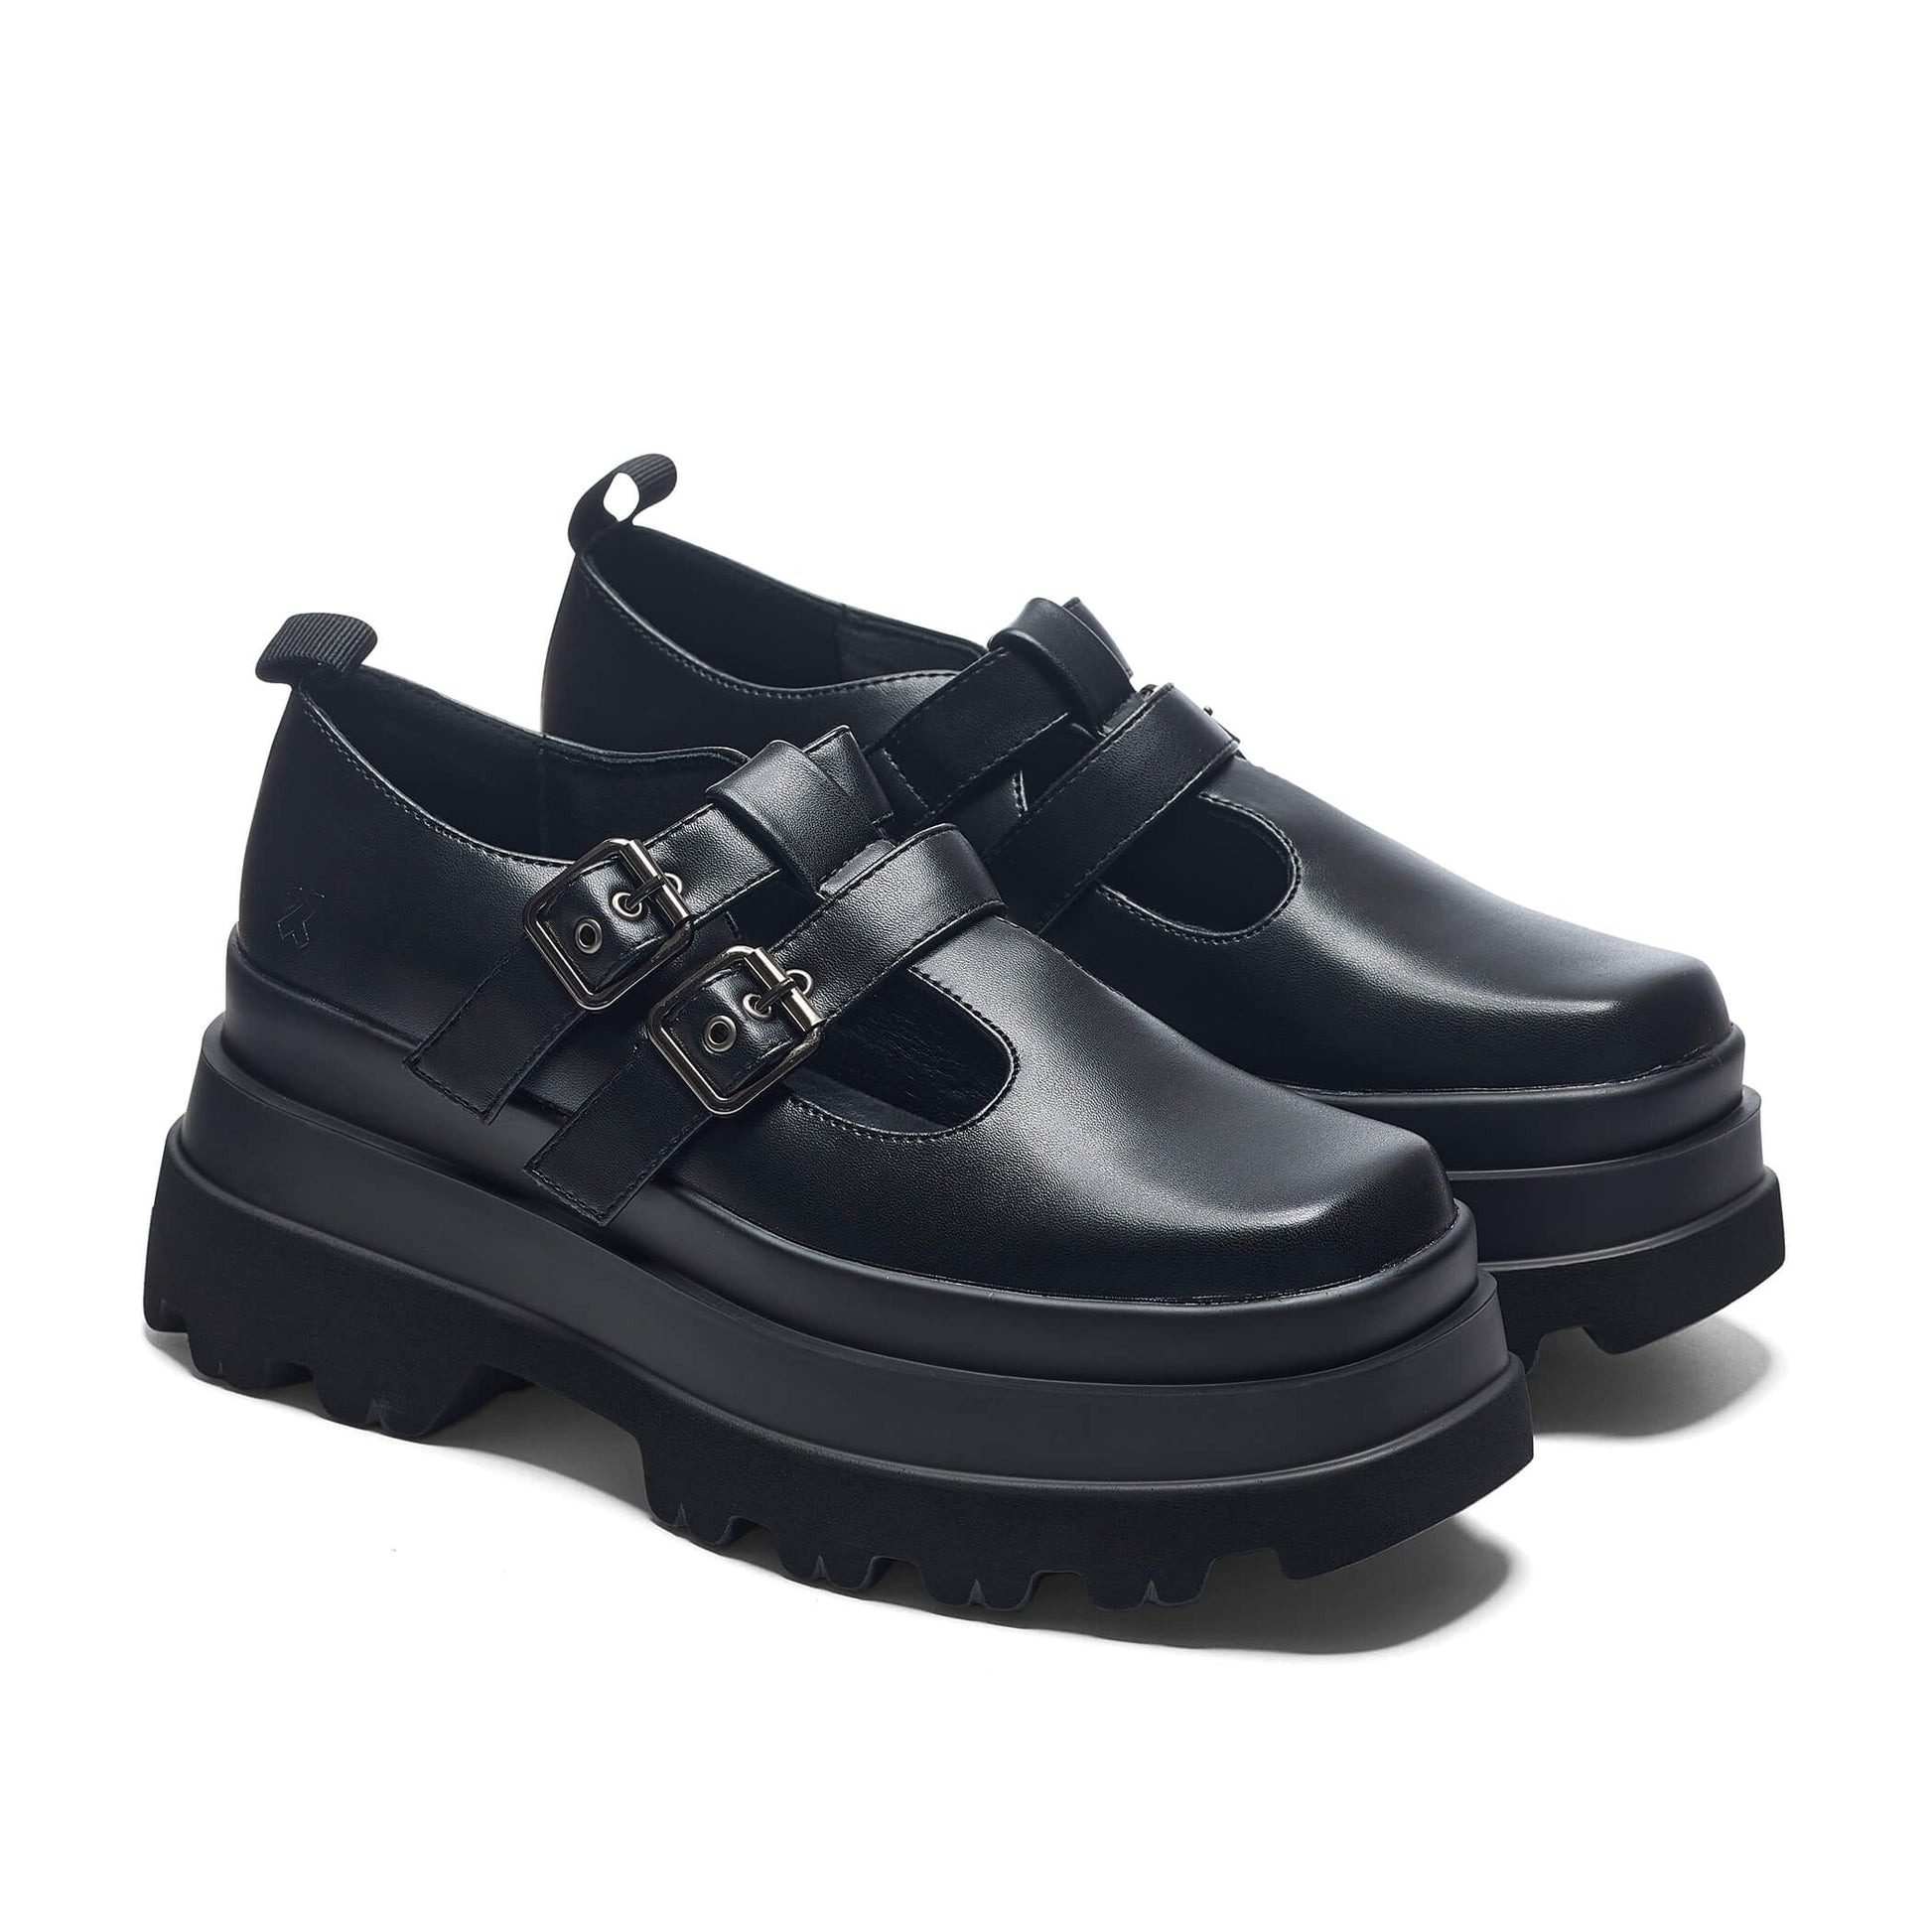 The Conquest Trident Mary Janes - Shoes - KOI Footwear - Black - Three-Quarter View